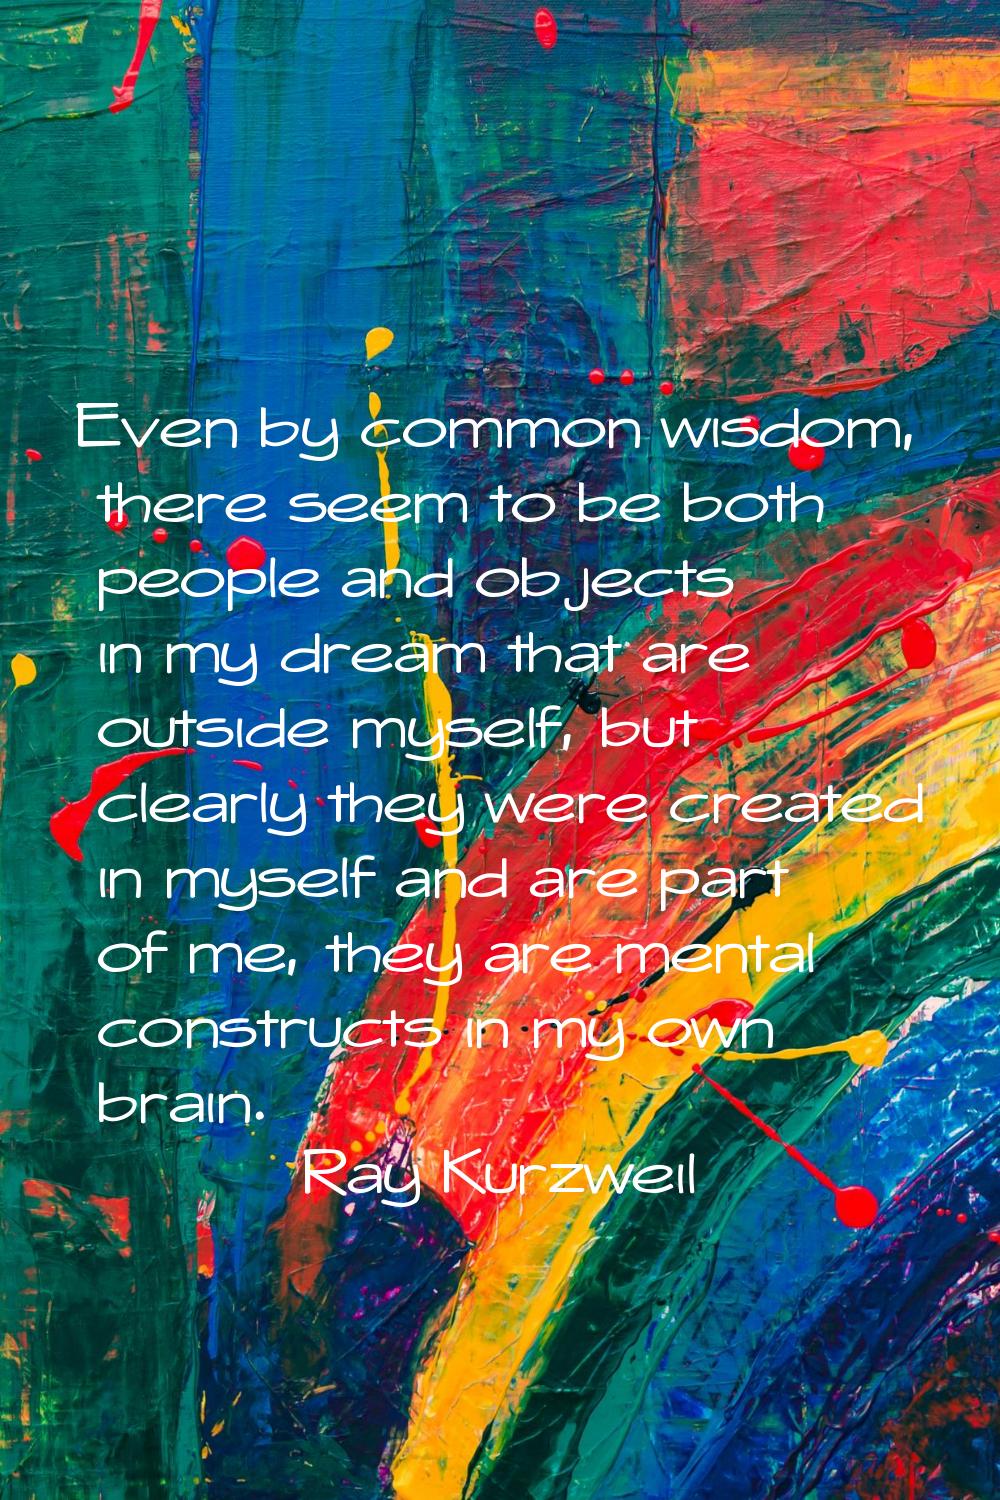 Even by common wisdom, there seem to be both people and objects in my dream that are outside myself